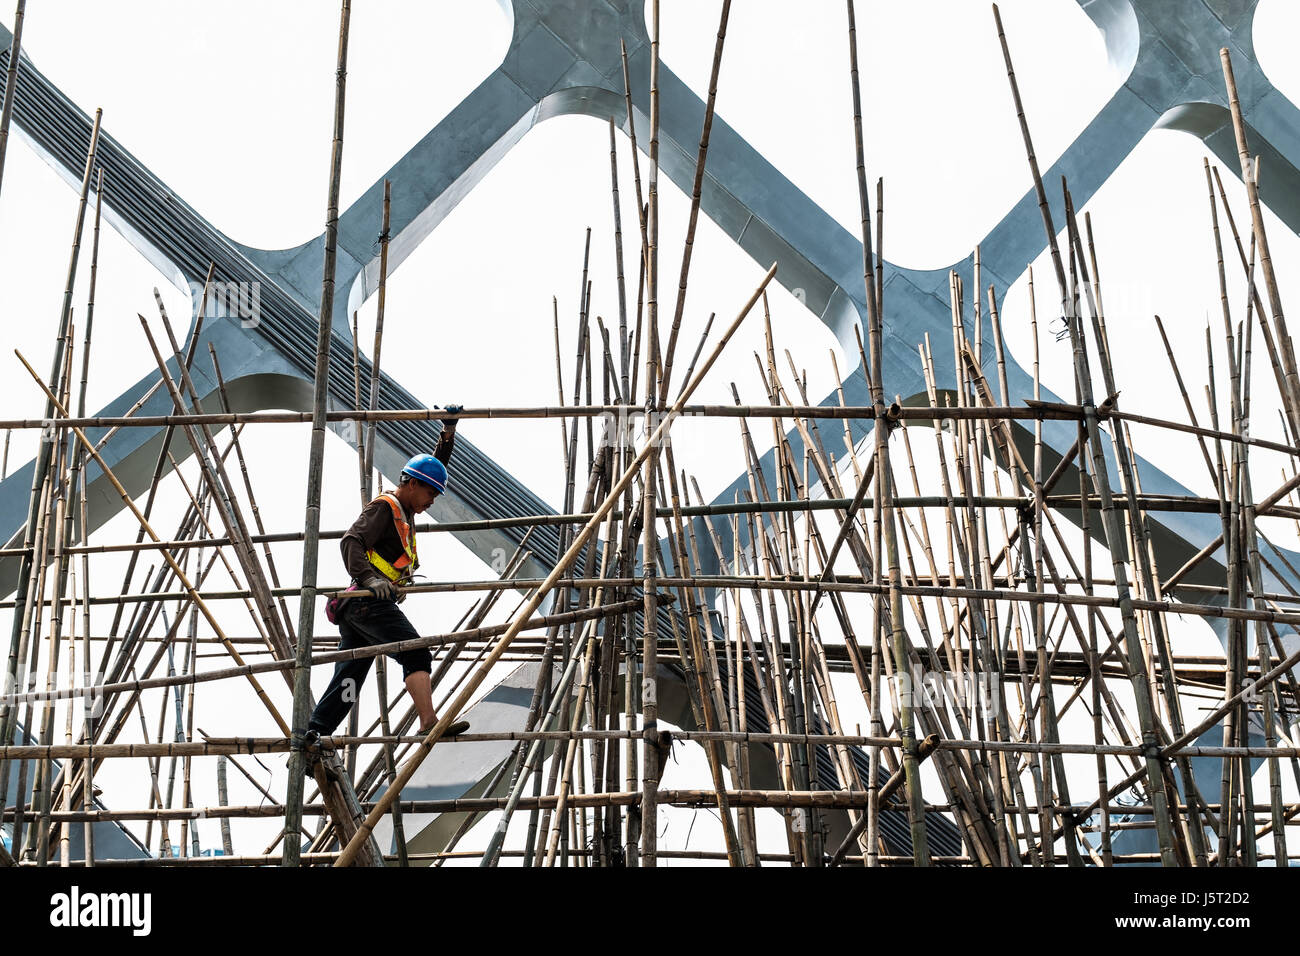 Shenzhen Bay Sports Centre, China, unrecognisable man walks on bamboo scaffolding. Stock Photo